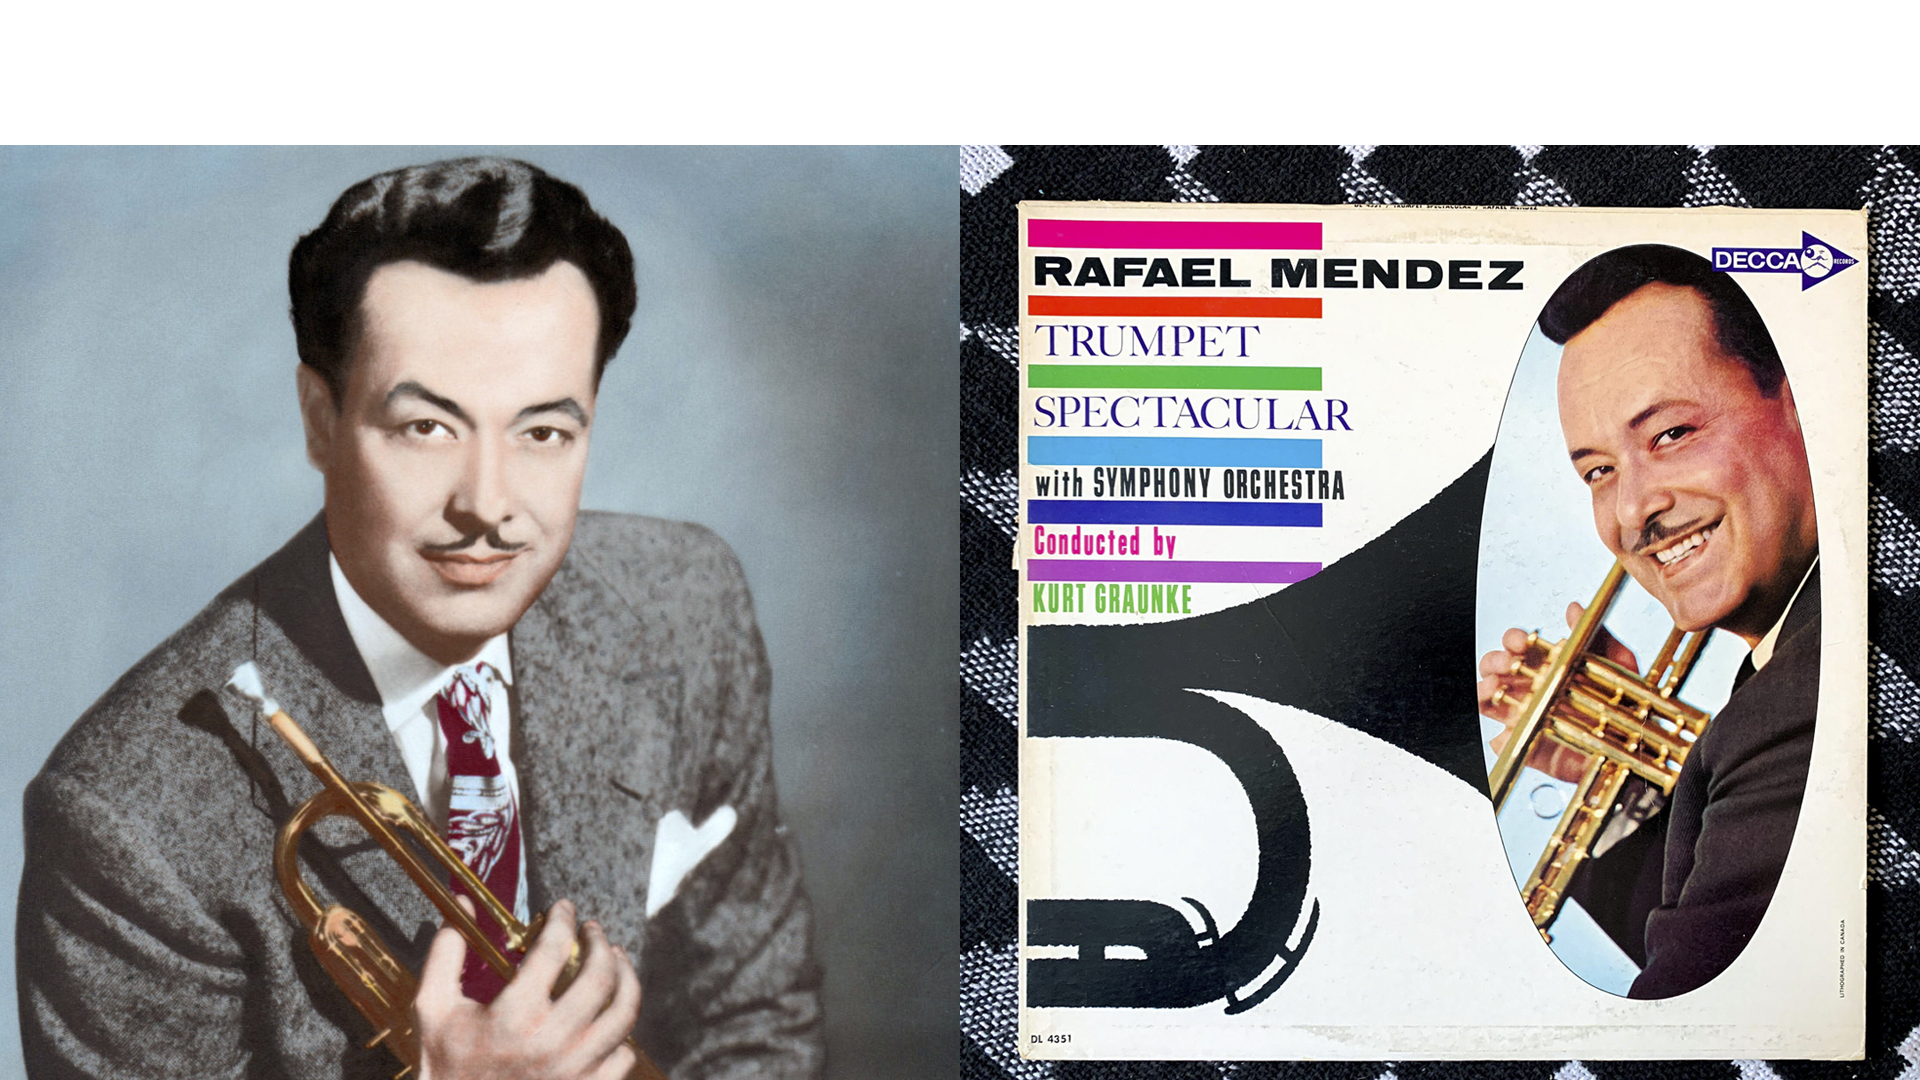 5 Facts from the Life of Rafael Mendez